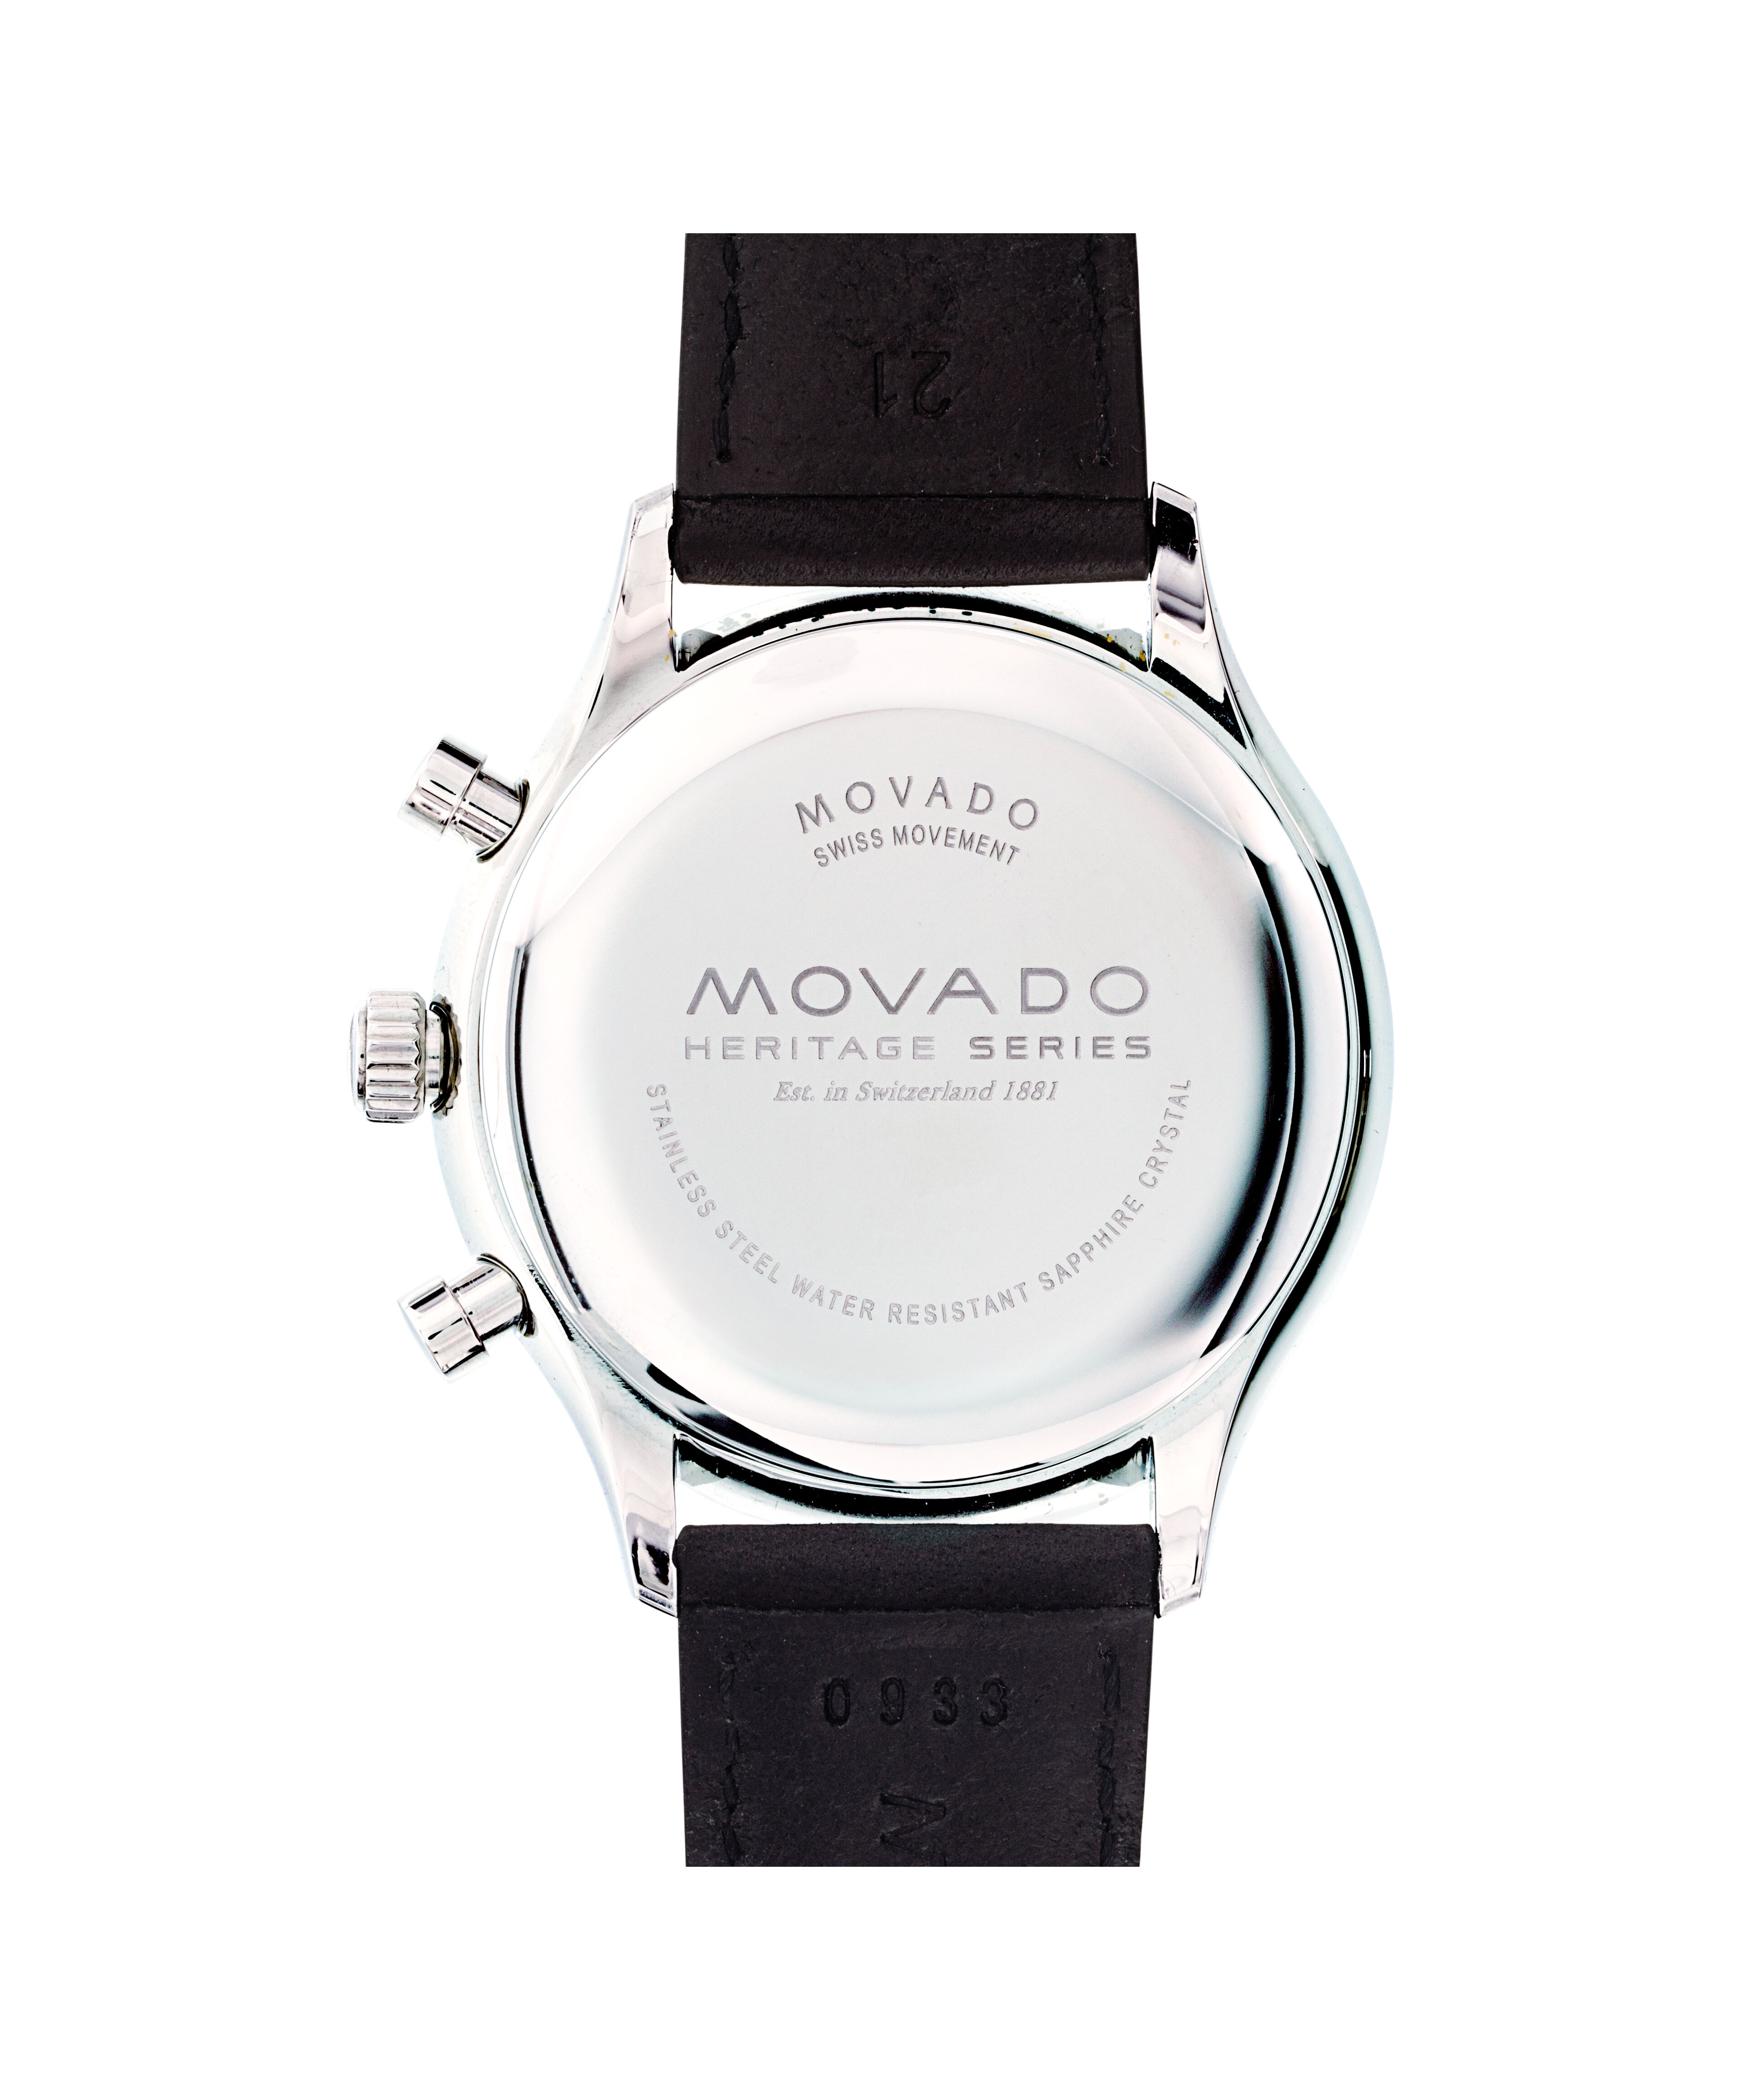 Movado [Movado] Mobard Cal.260 Antique Hand-wound Men's [Used]Movado Mobard E40.112.H4C Elliptica Unused Watch Stainless Steel/SSxGP Ladies